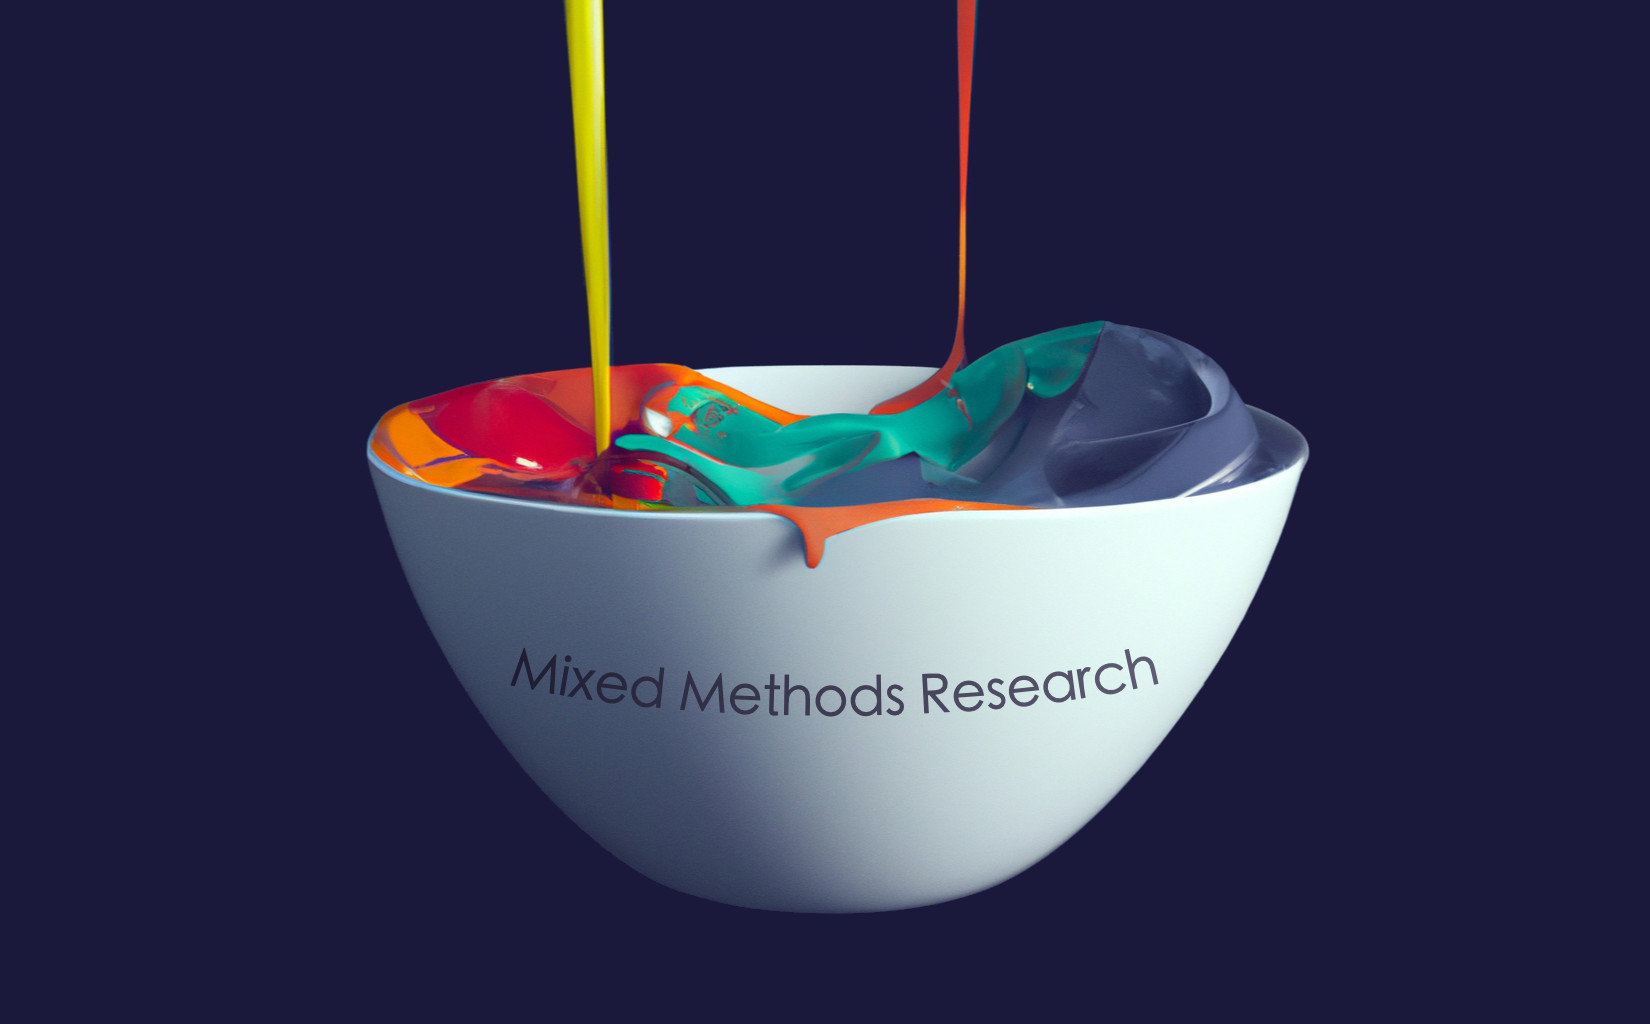 Mixed Methods Research